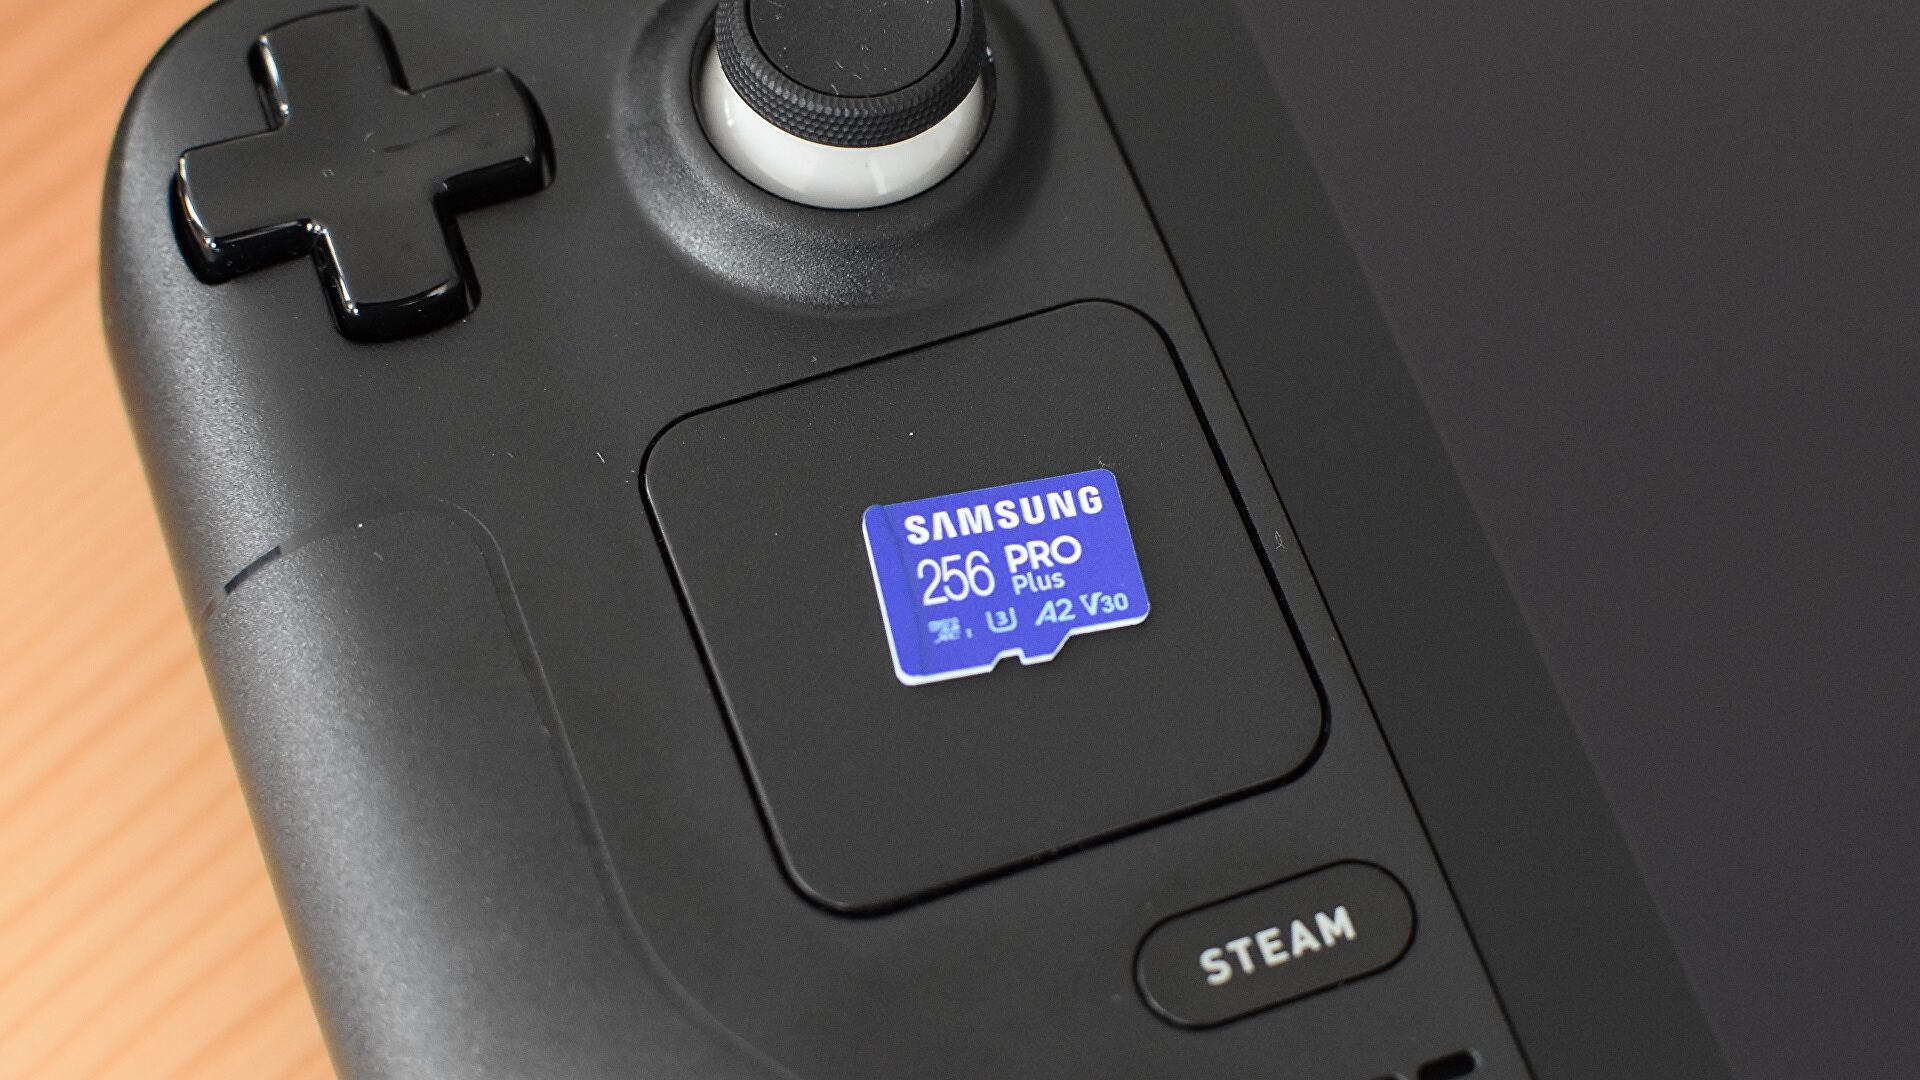 The best microSD card for the Steam Deck is going cheap this Black Friday